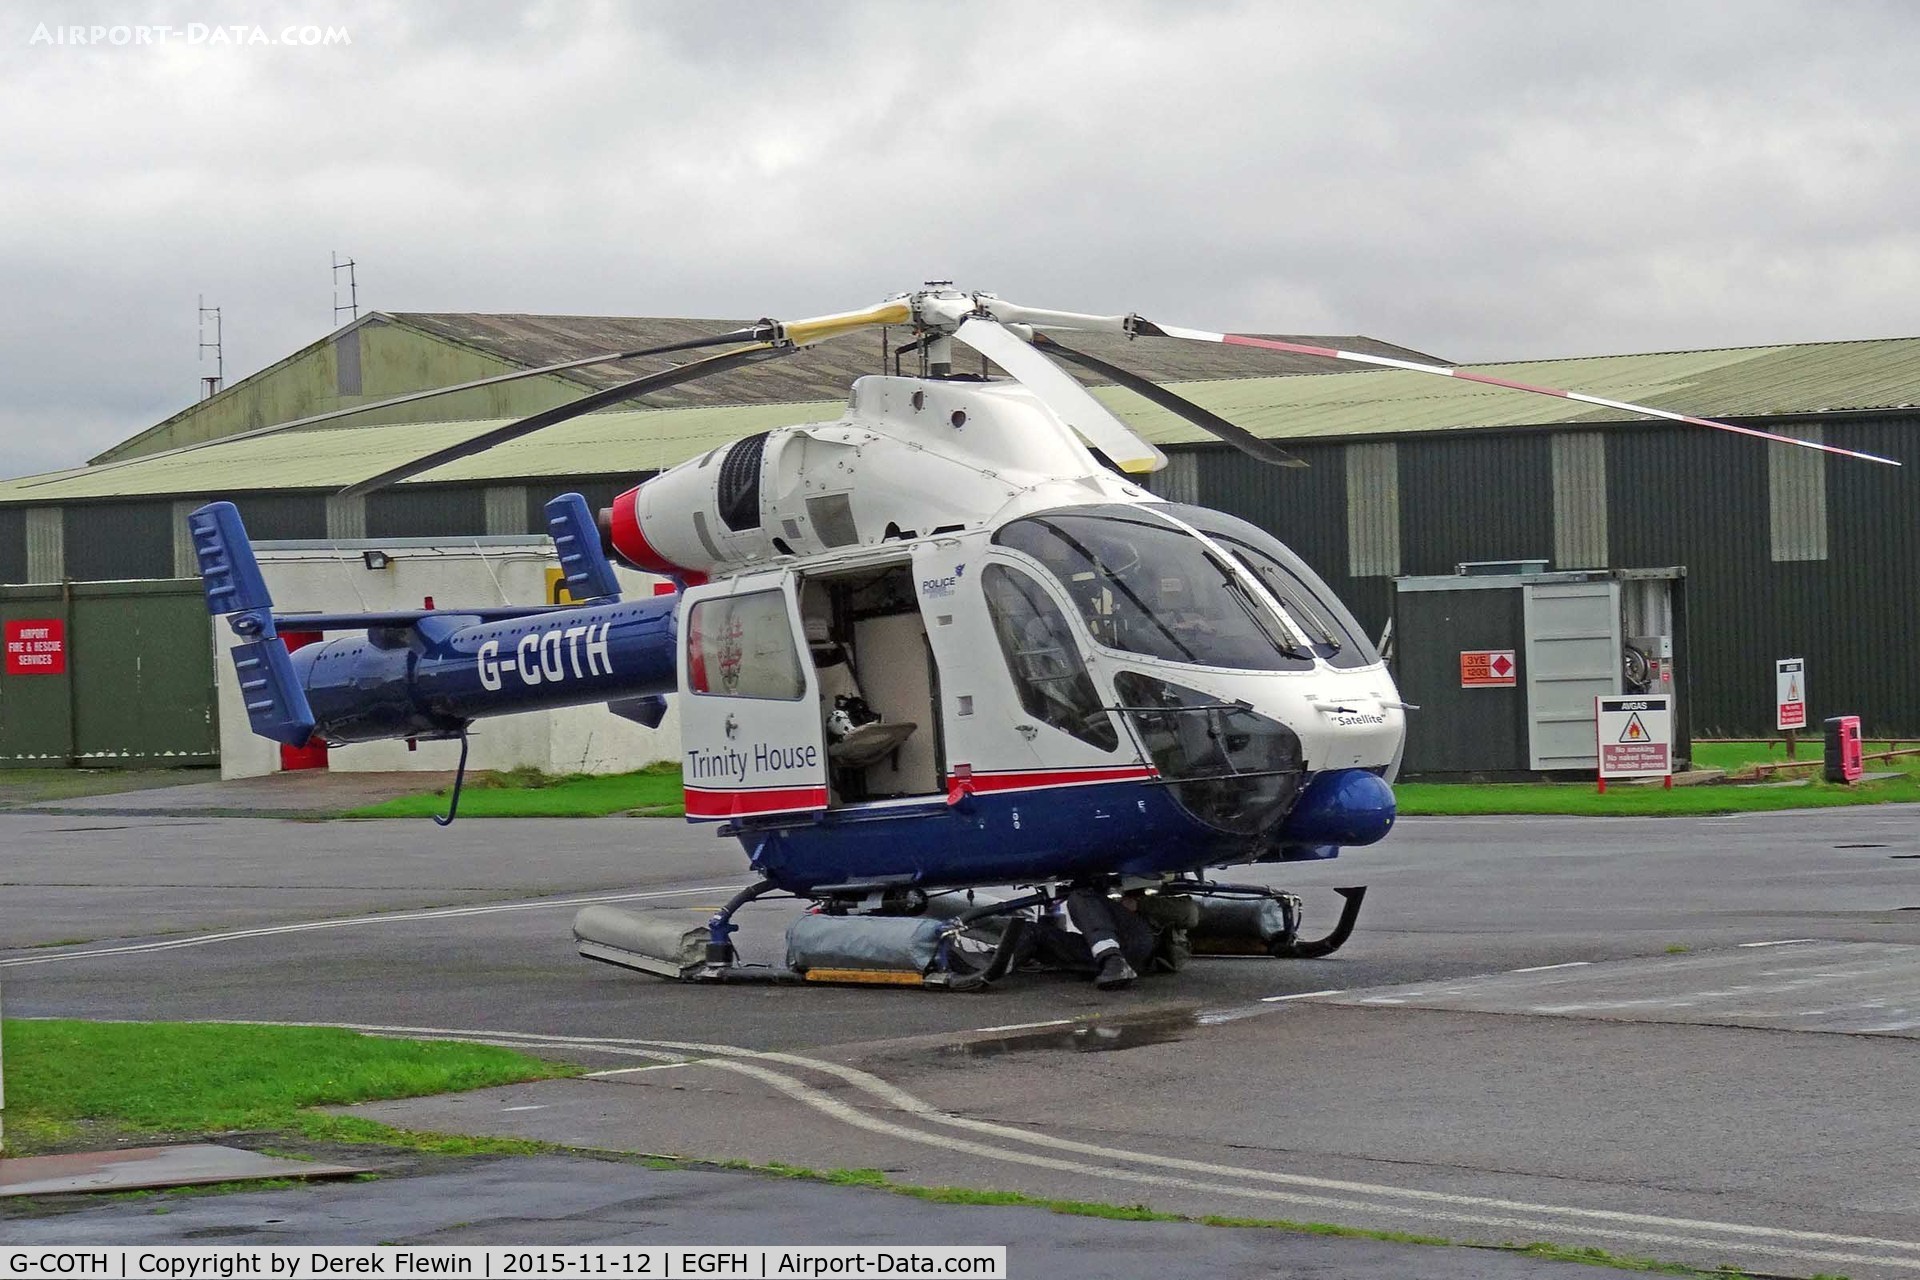 G-COTH, 2001 MD Helicopters MD-900 Explorer C/N 900-00085, Explorer, Specialist Aviation Services Ltd, Gloucestershire Airport Staverton based, previously N7033V, N3PD, N3PD, Leased to Trinity House, seen being worked on.